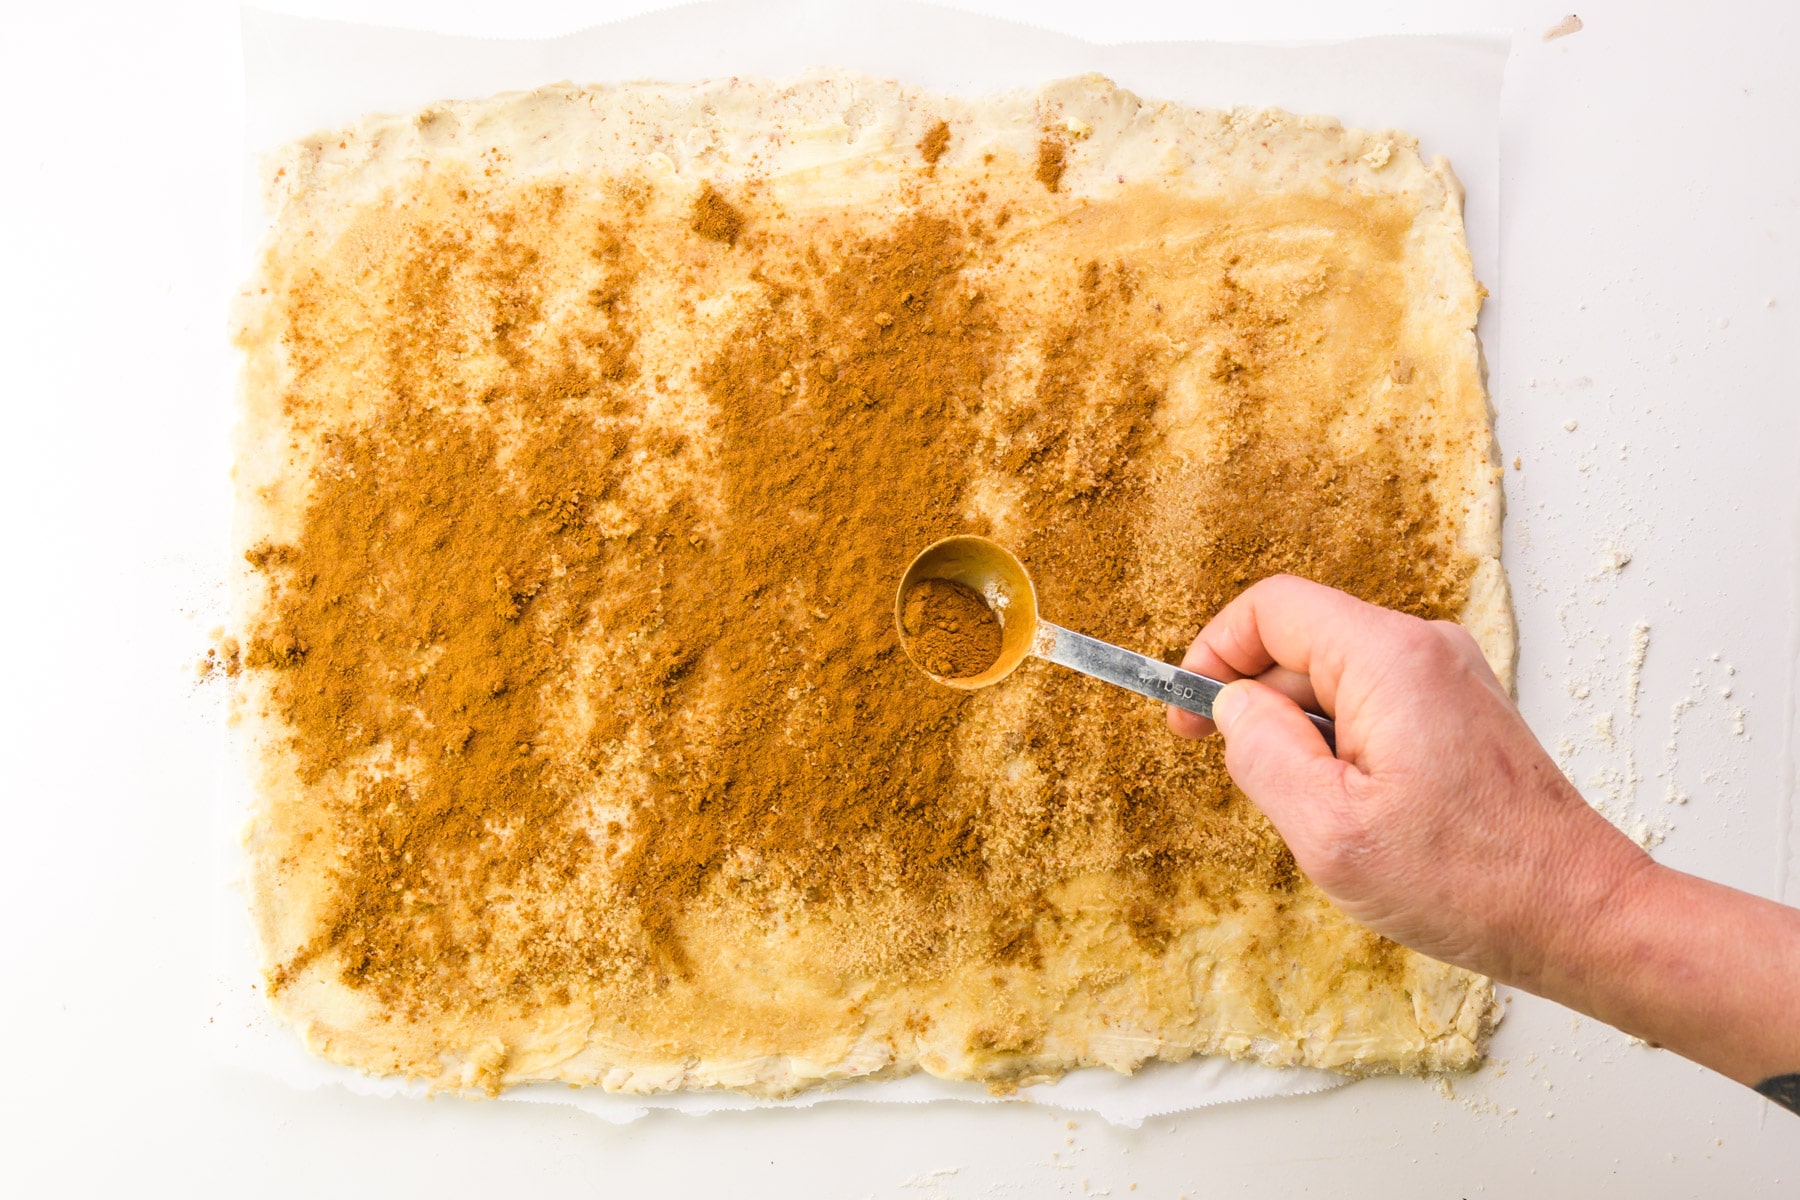 A hand holds a spoon sprinkling ground cinnamon over rolled out dough.